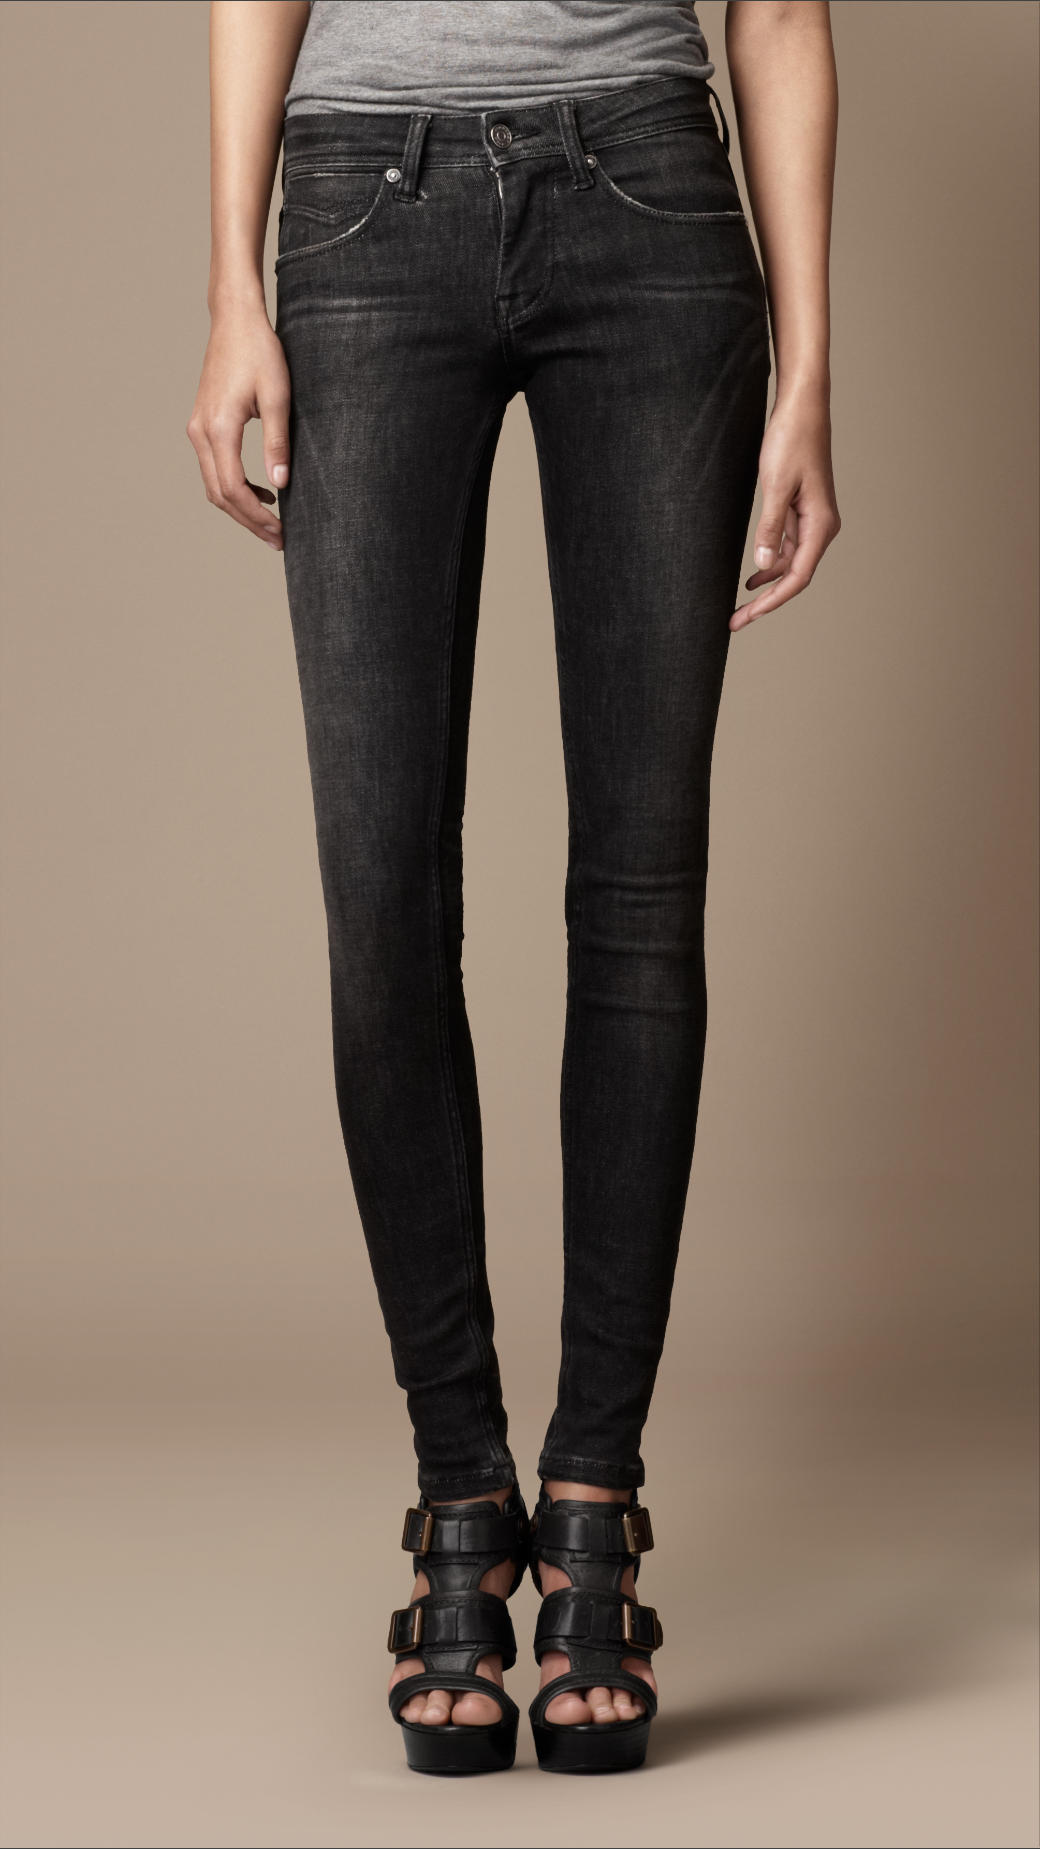 Burberry Brit Bexton Skinny Fit with Zip in Black | Lyst